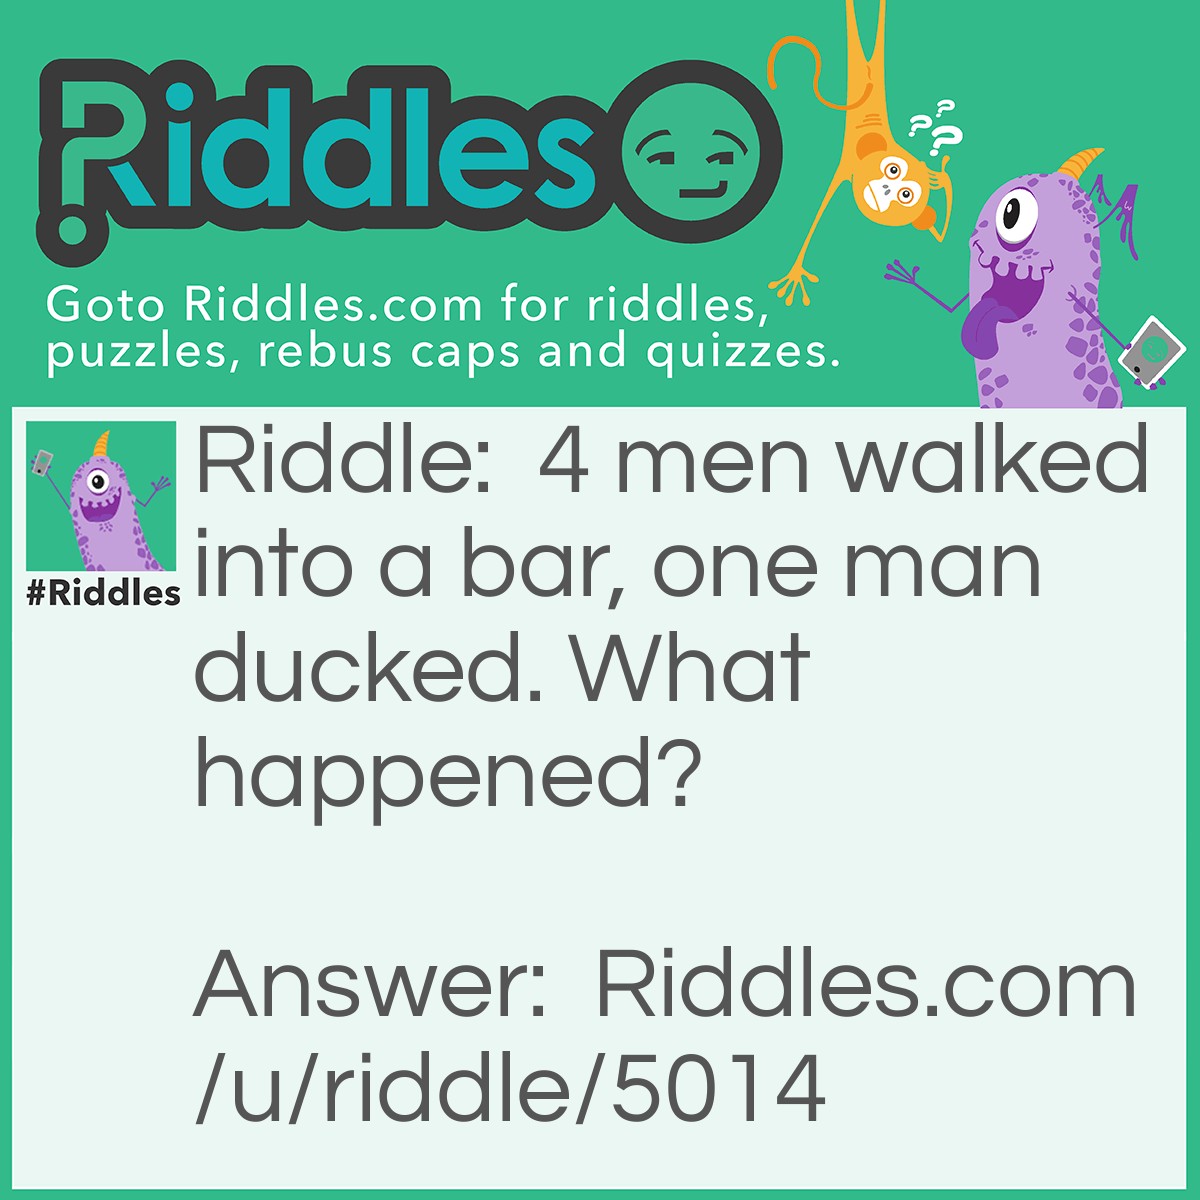 Riddle: 4 men walked into a bar, one man ducked. What happened? Answer: The 3 men walked into a bar, one man ducked under the bar.